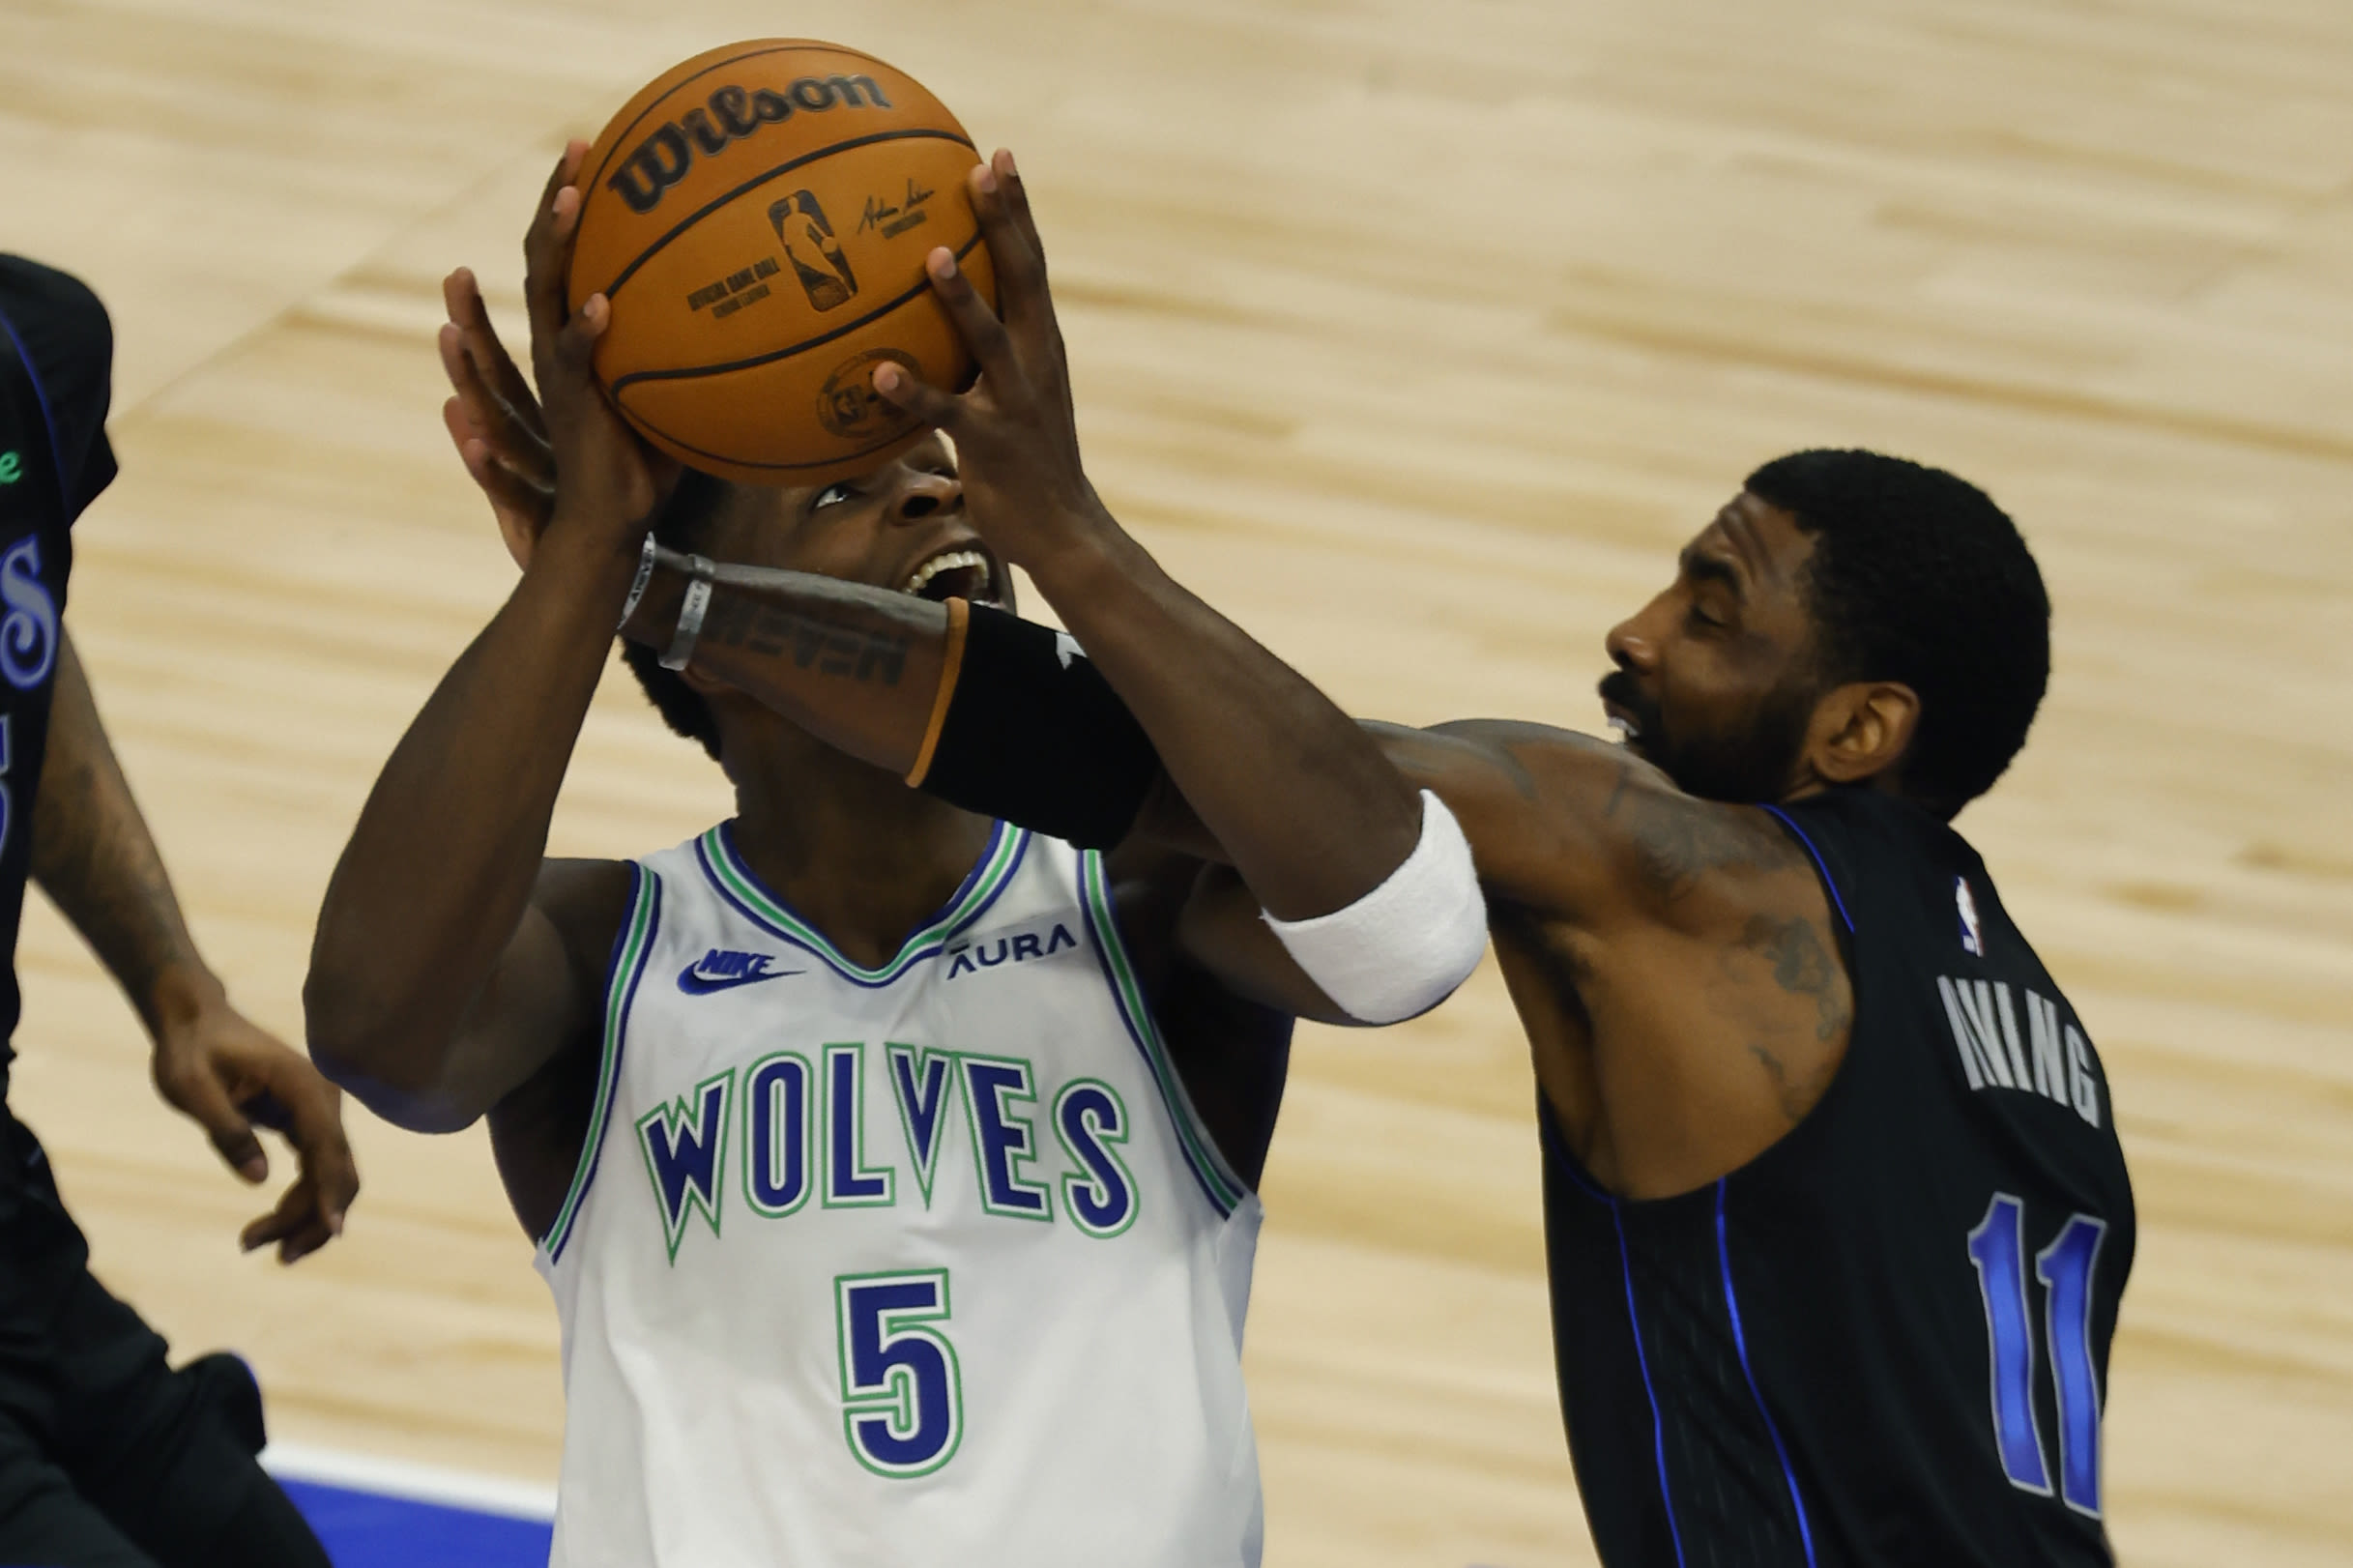 T-wolves struggling to get Edwards going, as another off game has them down 2-0 and headed to Dallas